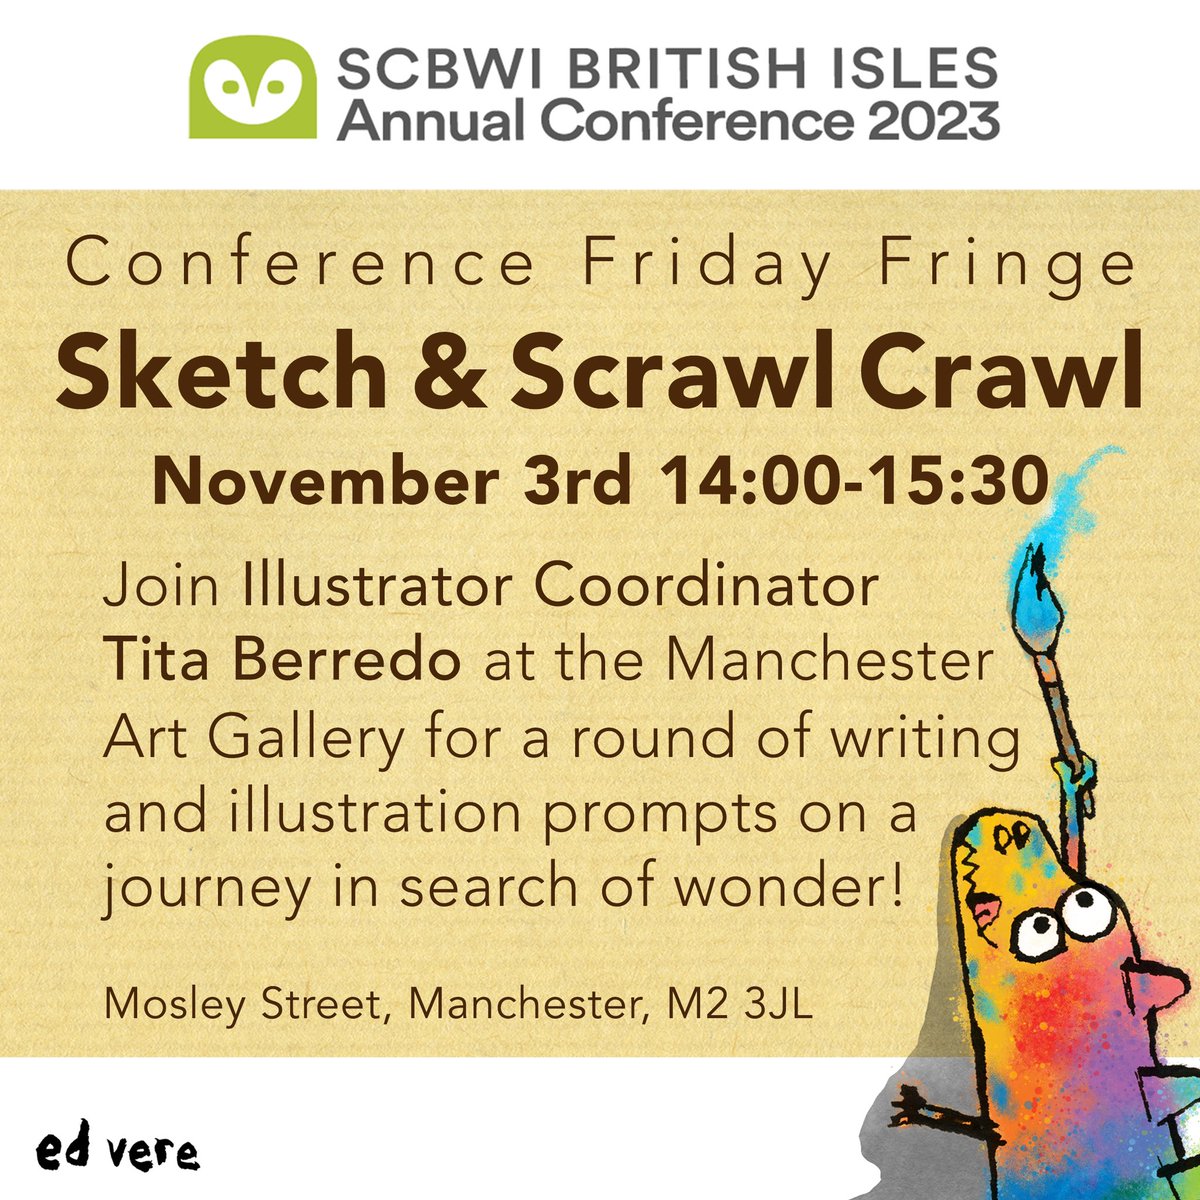 Children’s Writers and Illustrators, come and join me on this @SCBWI_BI Conference Fringe Event!